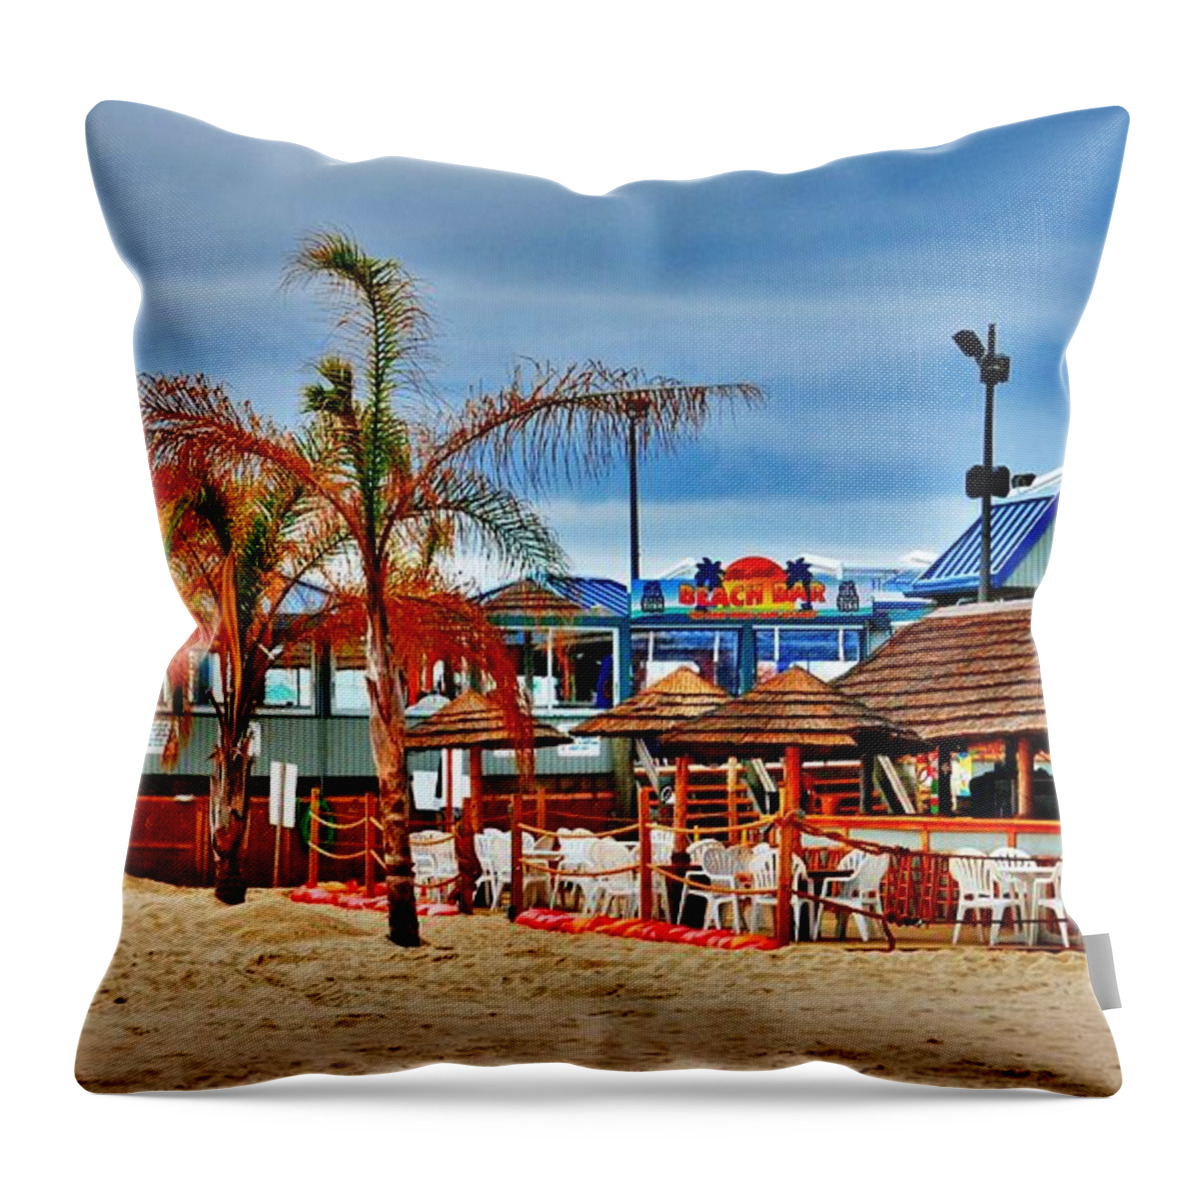 Jersey Shore Throw Pillow featuring the photograph Martells On The Beach - Jersey Shore by Angie Tirado